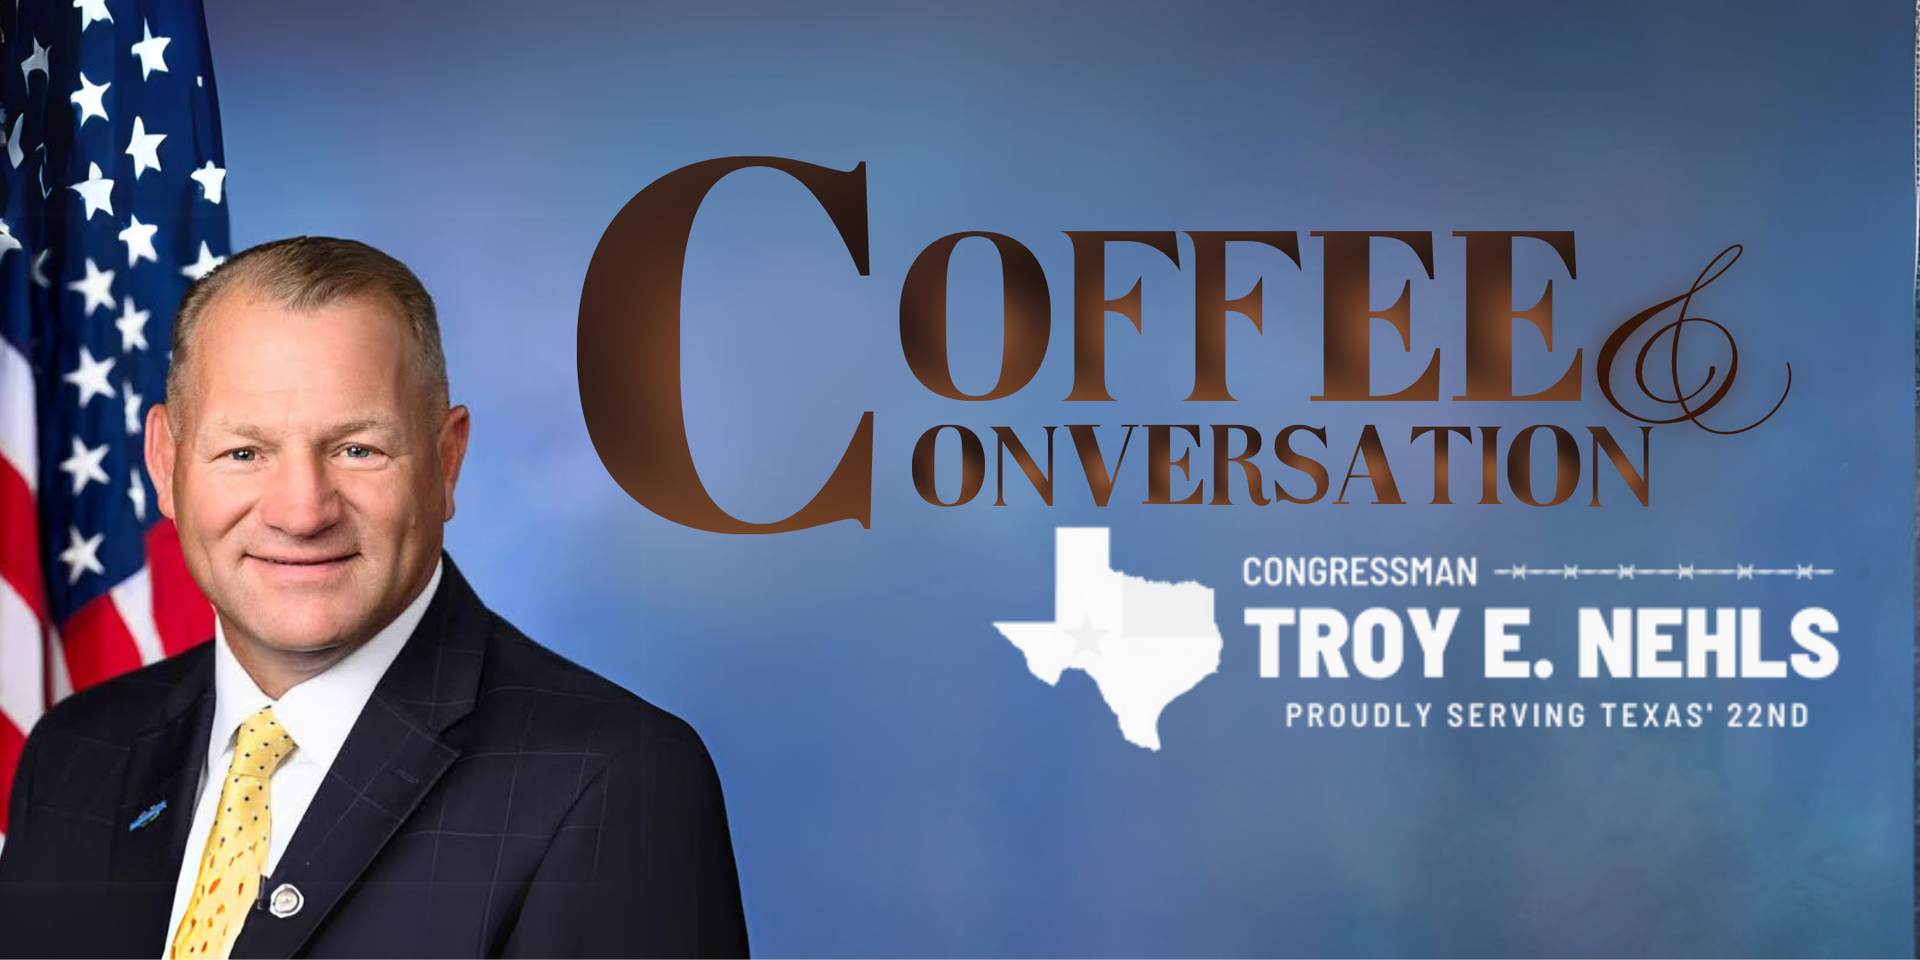 thumbnails Conversation & Coffee with Congressman Troy Nehls